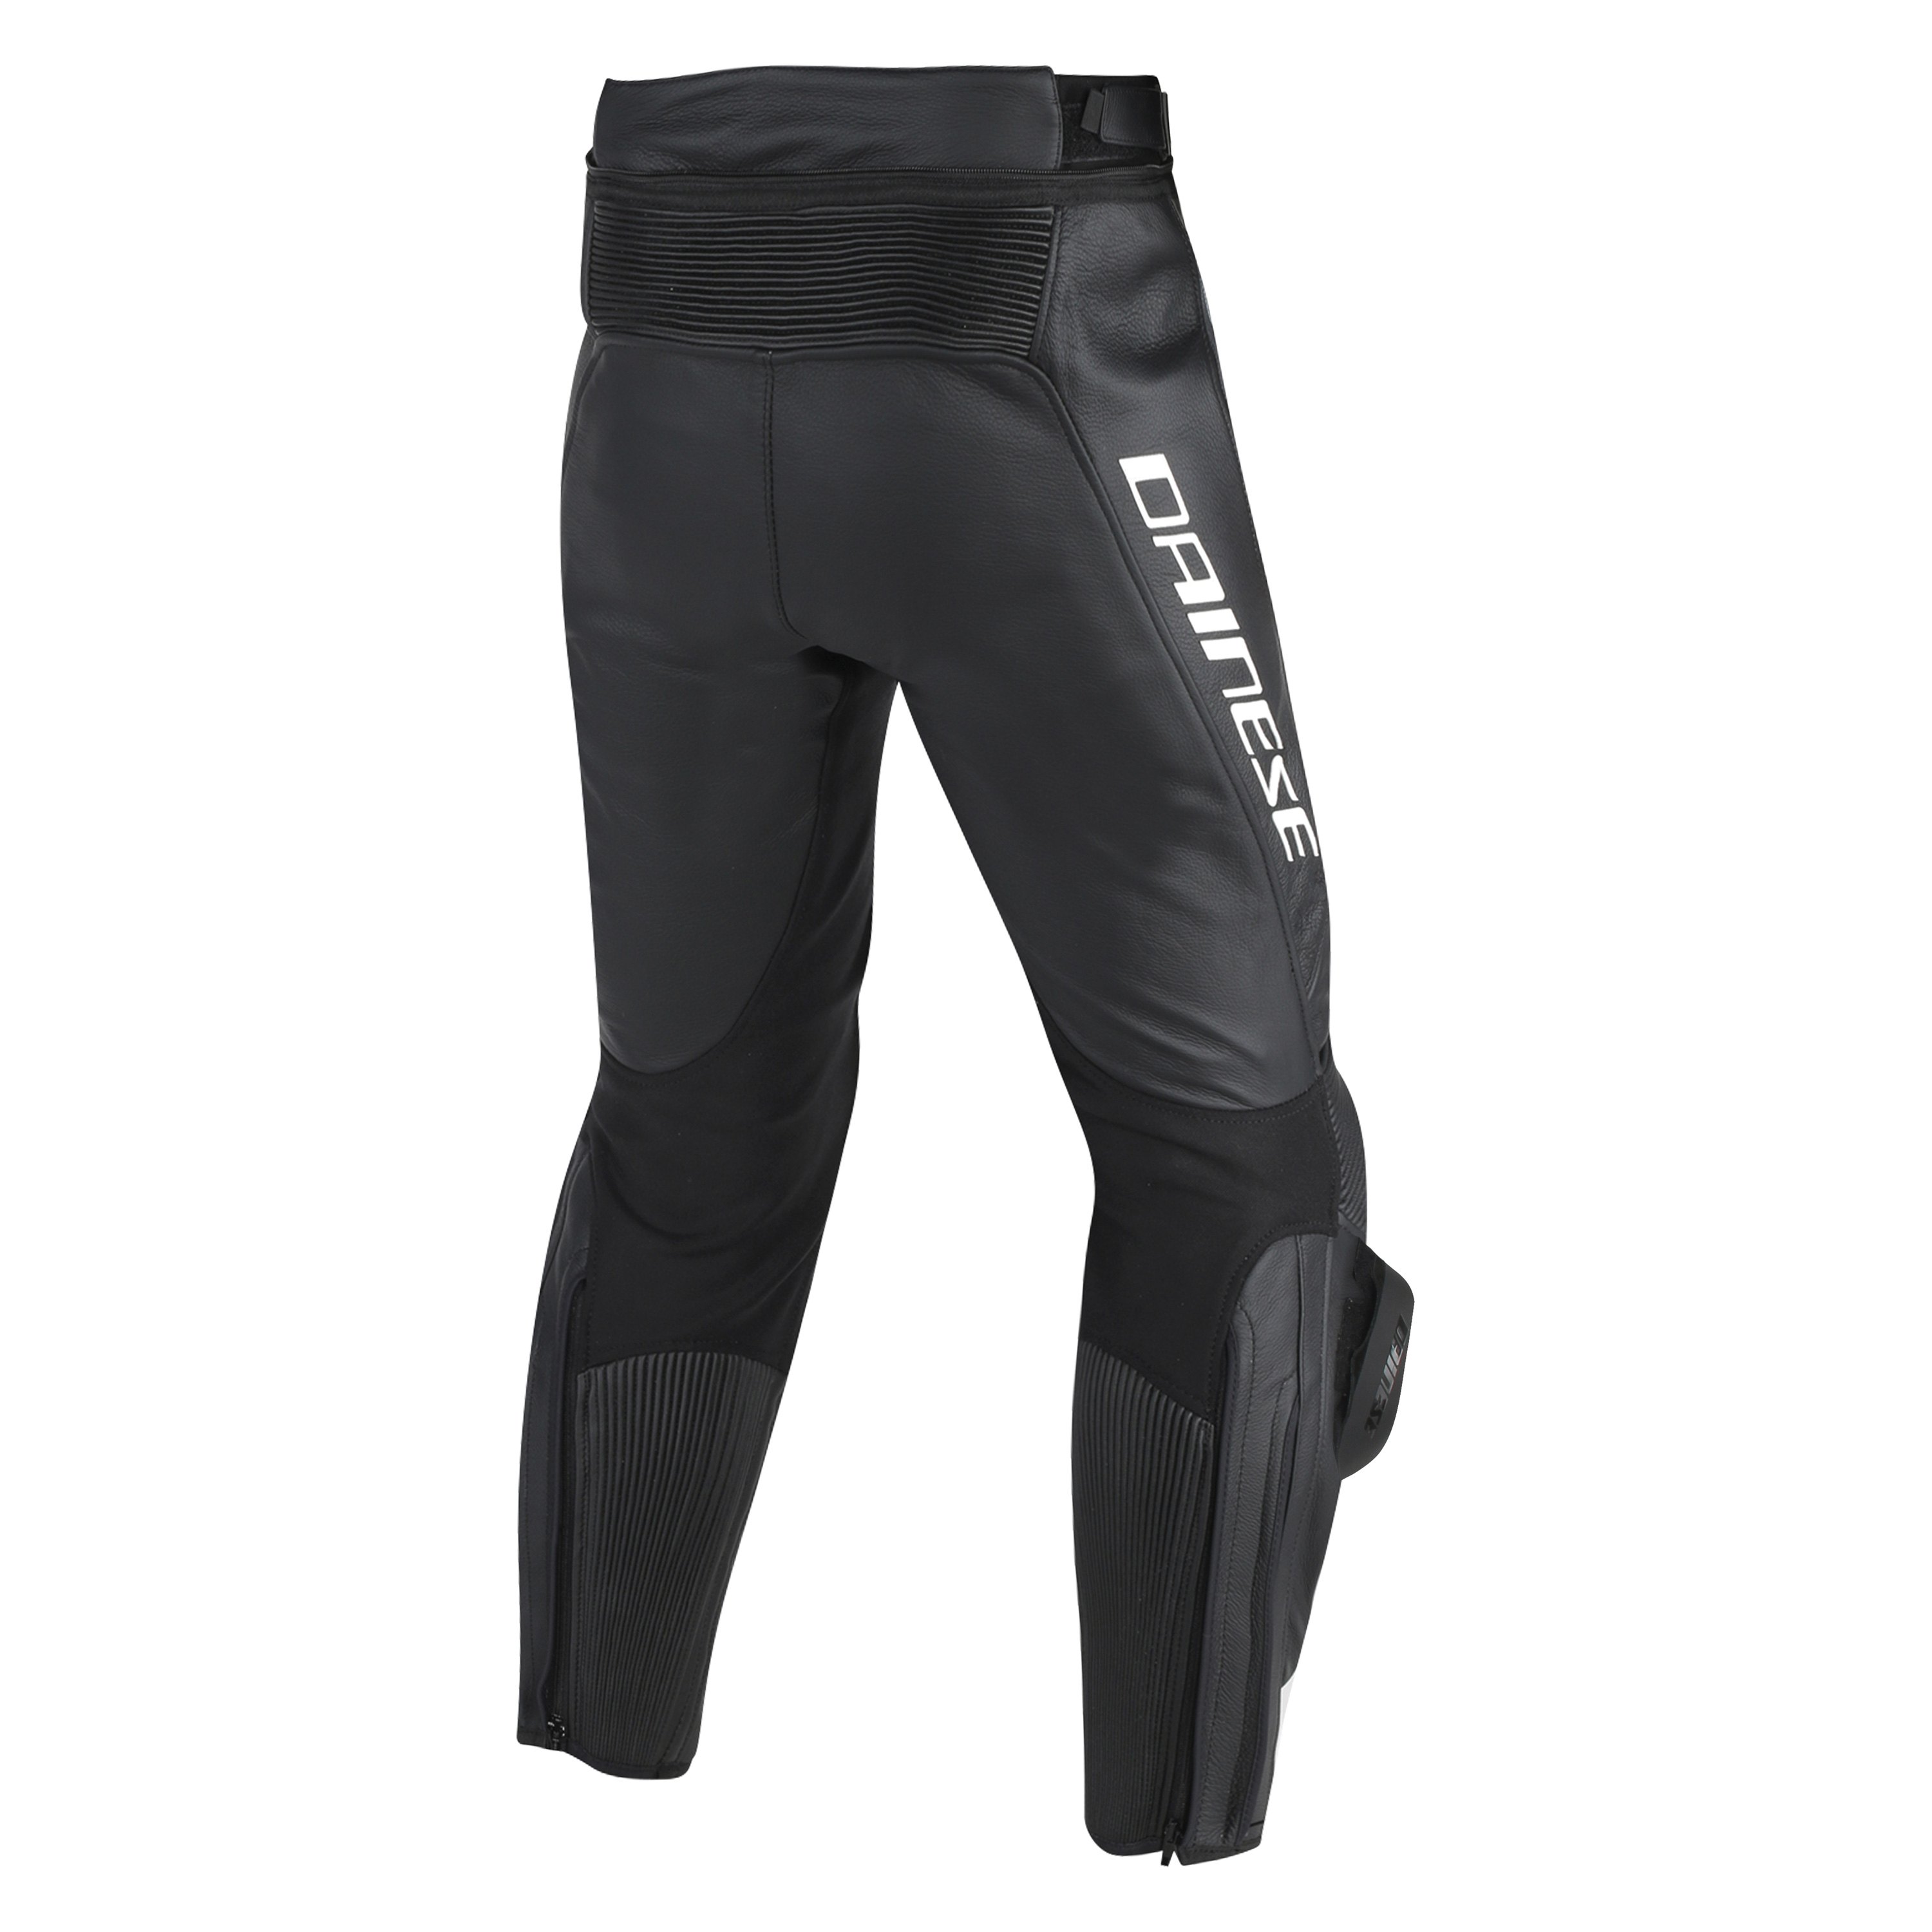 Dainese® - Misano Perforated Leather Pants - MOTORCYCLEiD.com